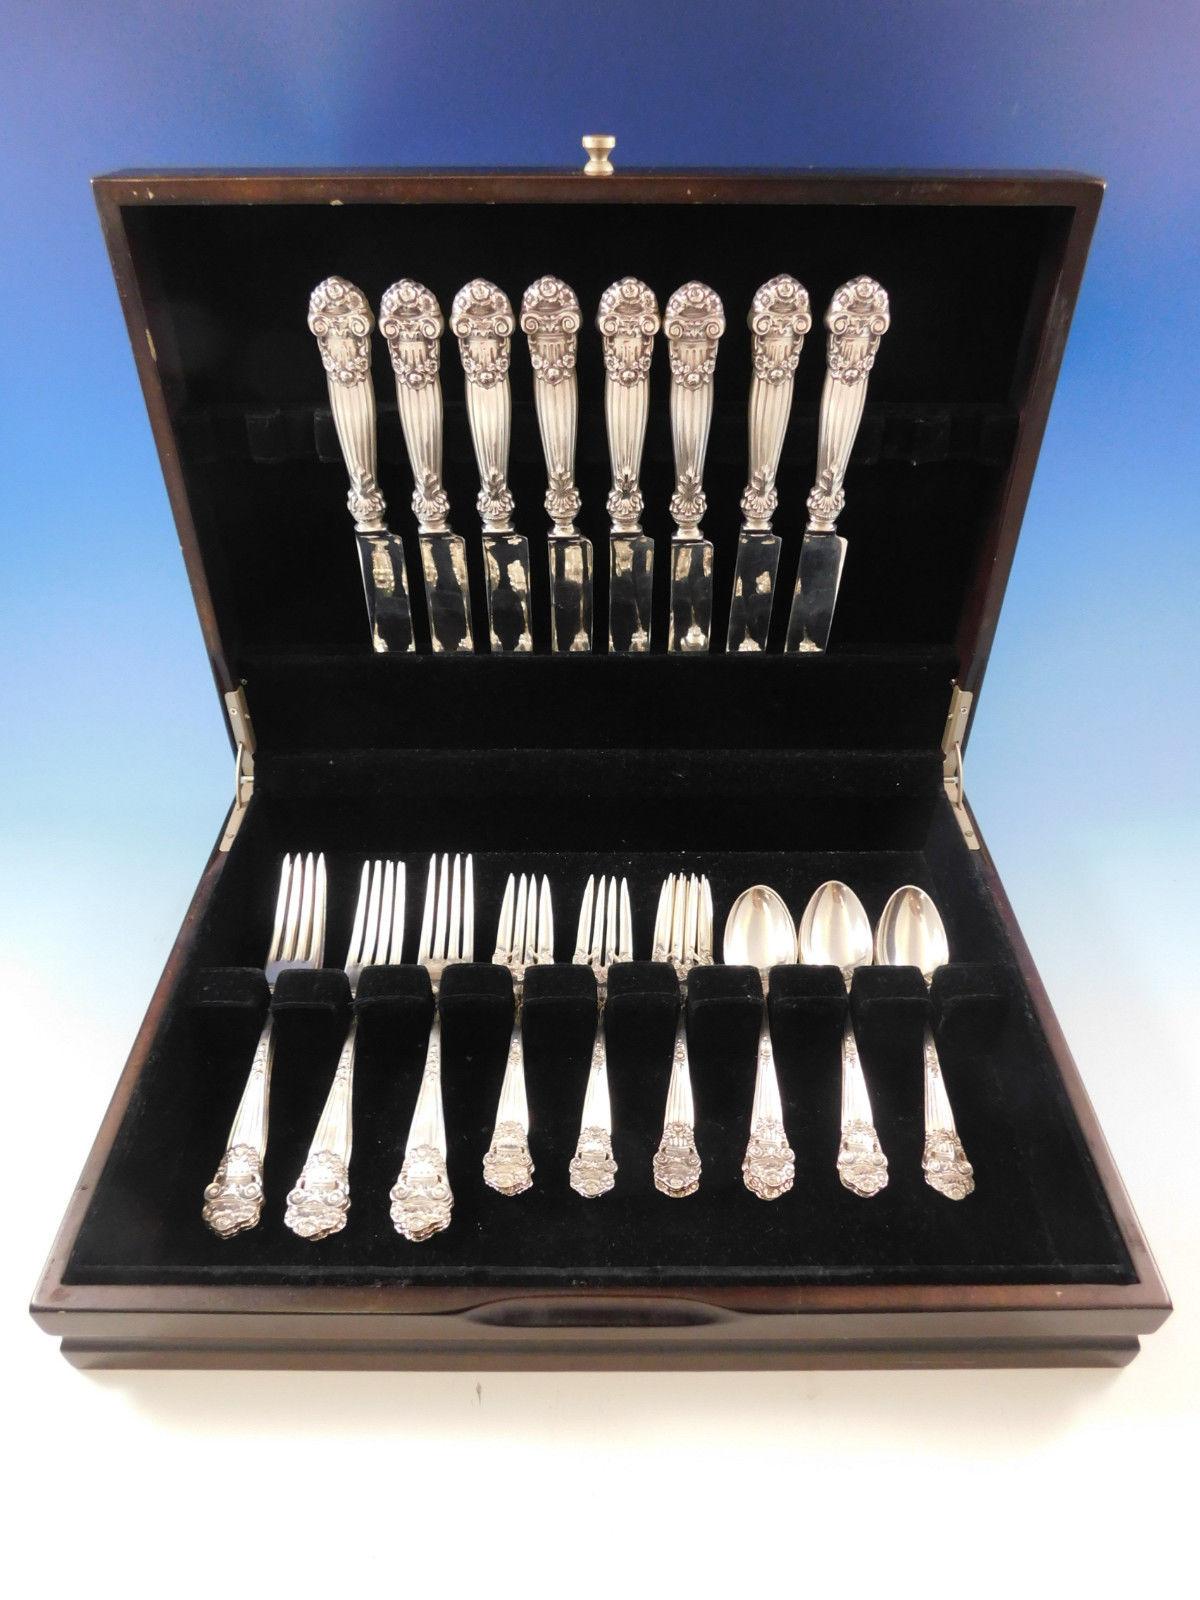 Georgian by Towle sterling silver flatware set-32 pieces. This set includes:

8 knives, 9